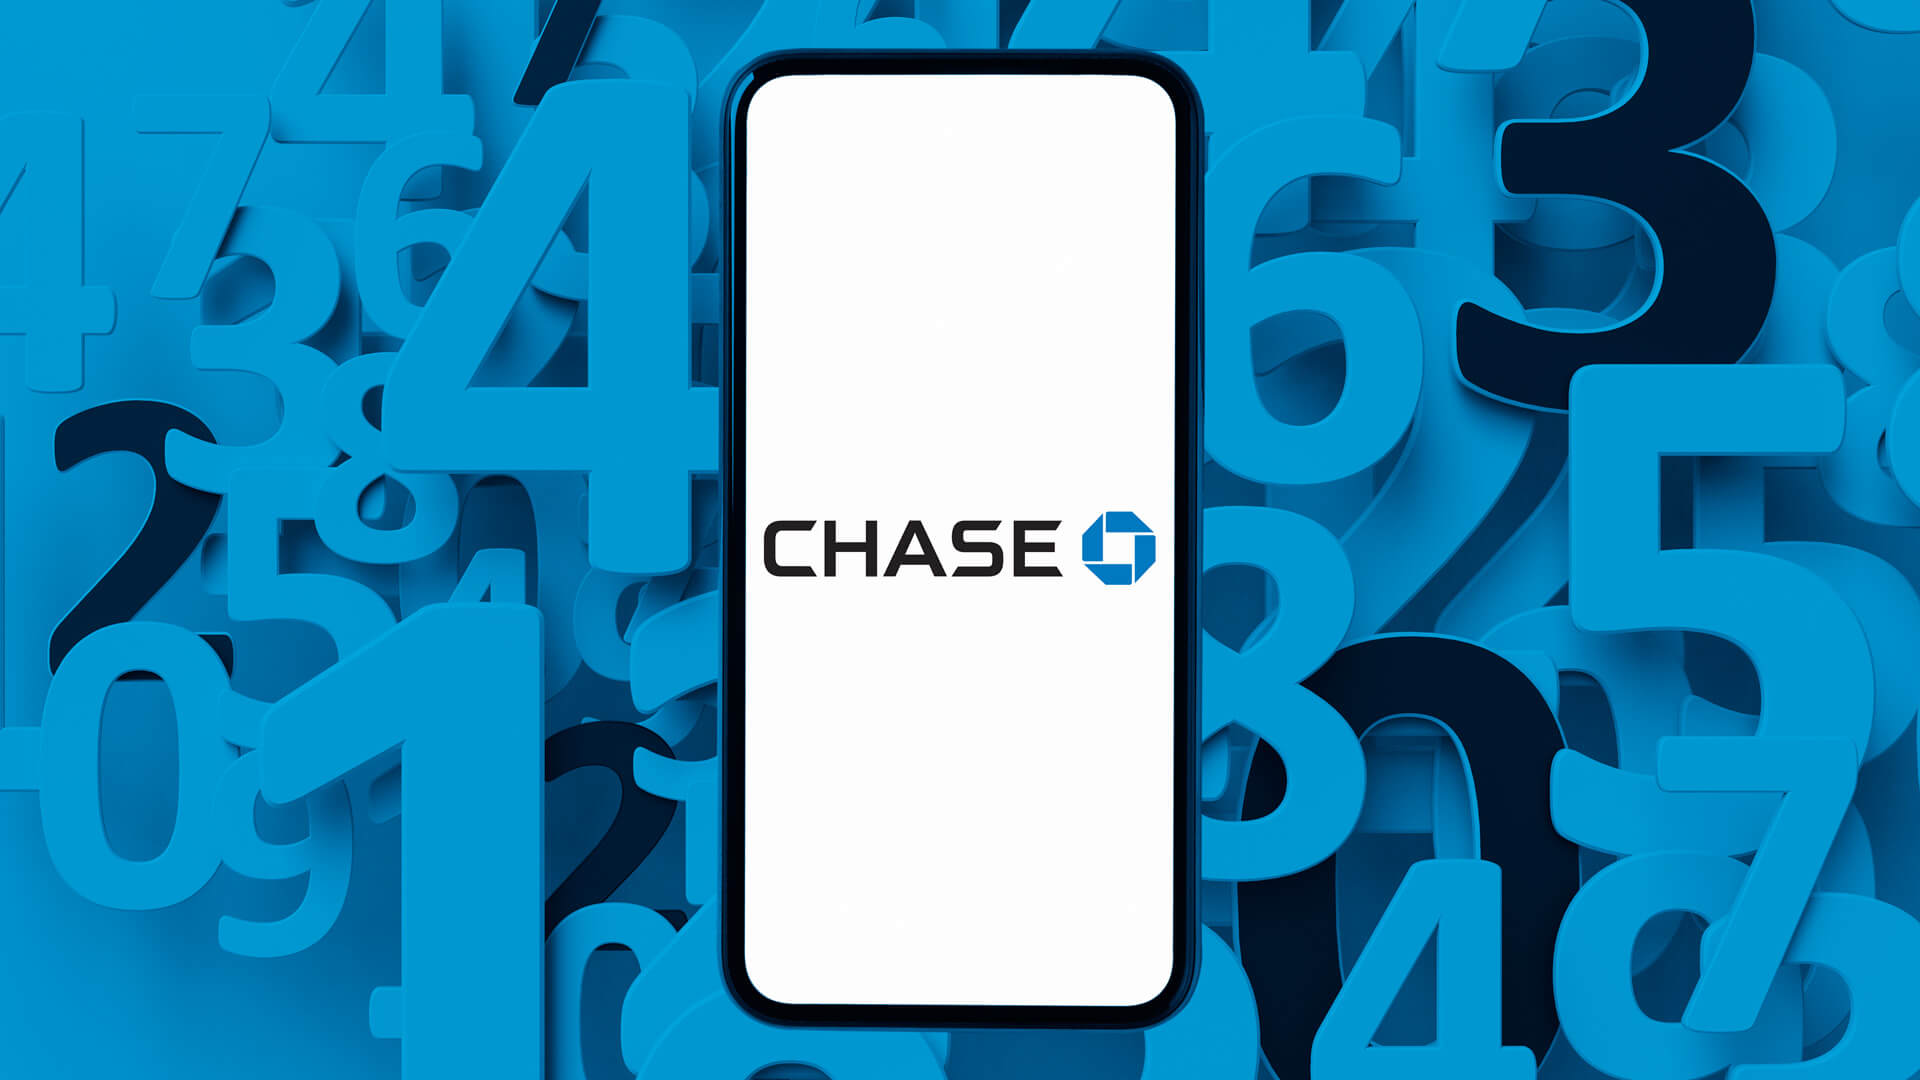 chase bank colorado springs routing number deep